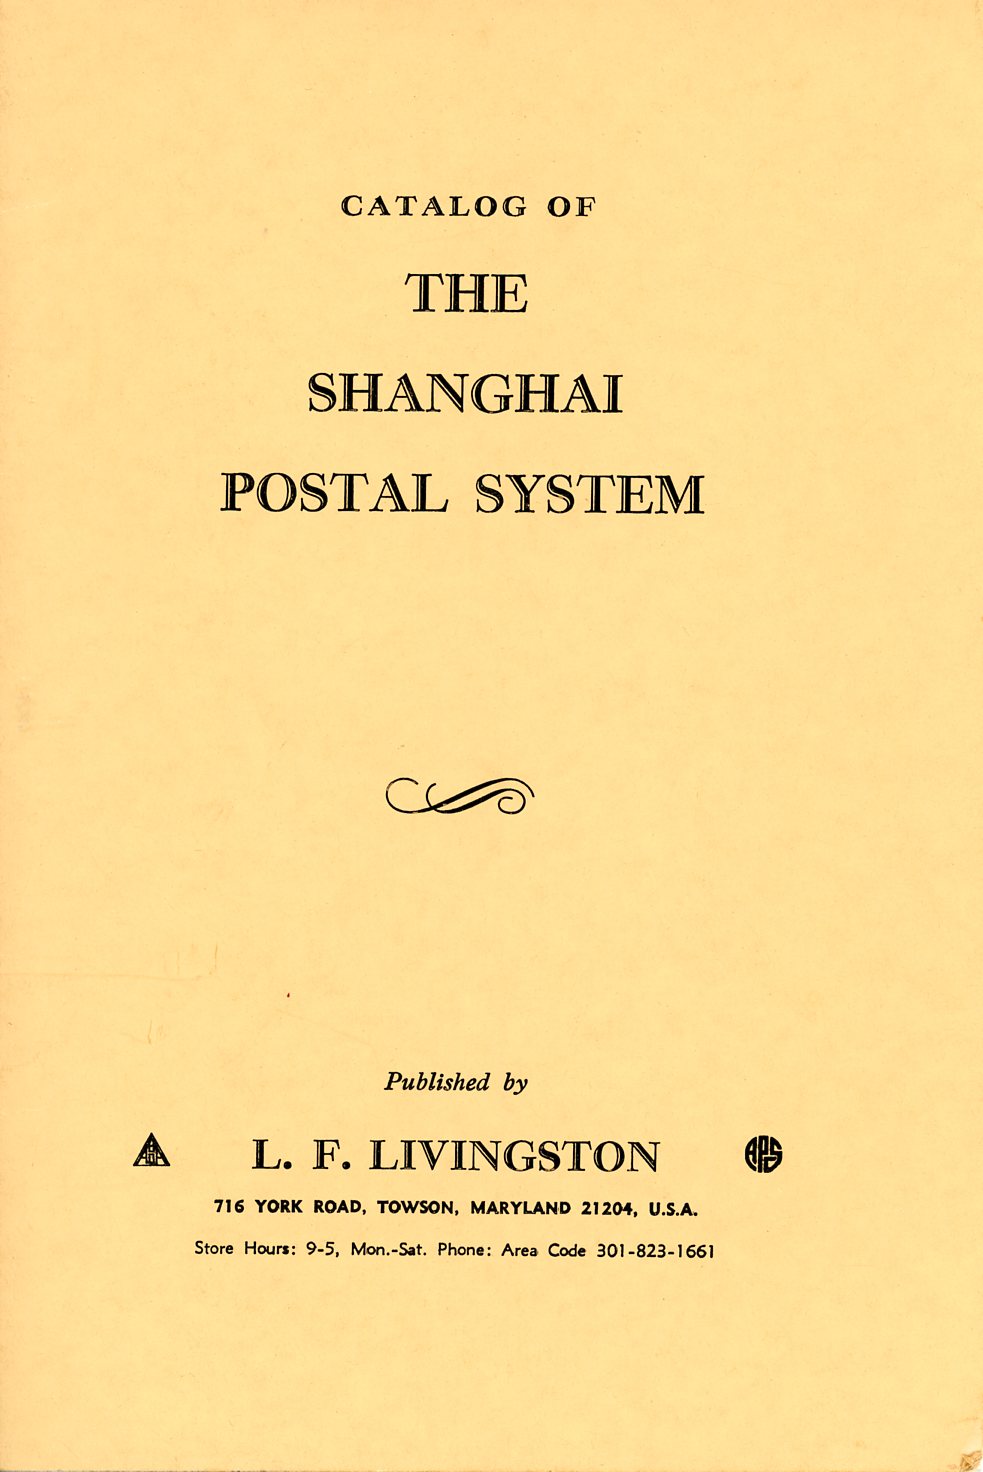 Catalog of the Shanghai Postal System edited by Lyons F. Livingstone, 1971 (American Philatelic Society reprint), in very good condition (8 oz)